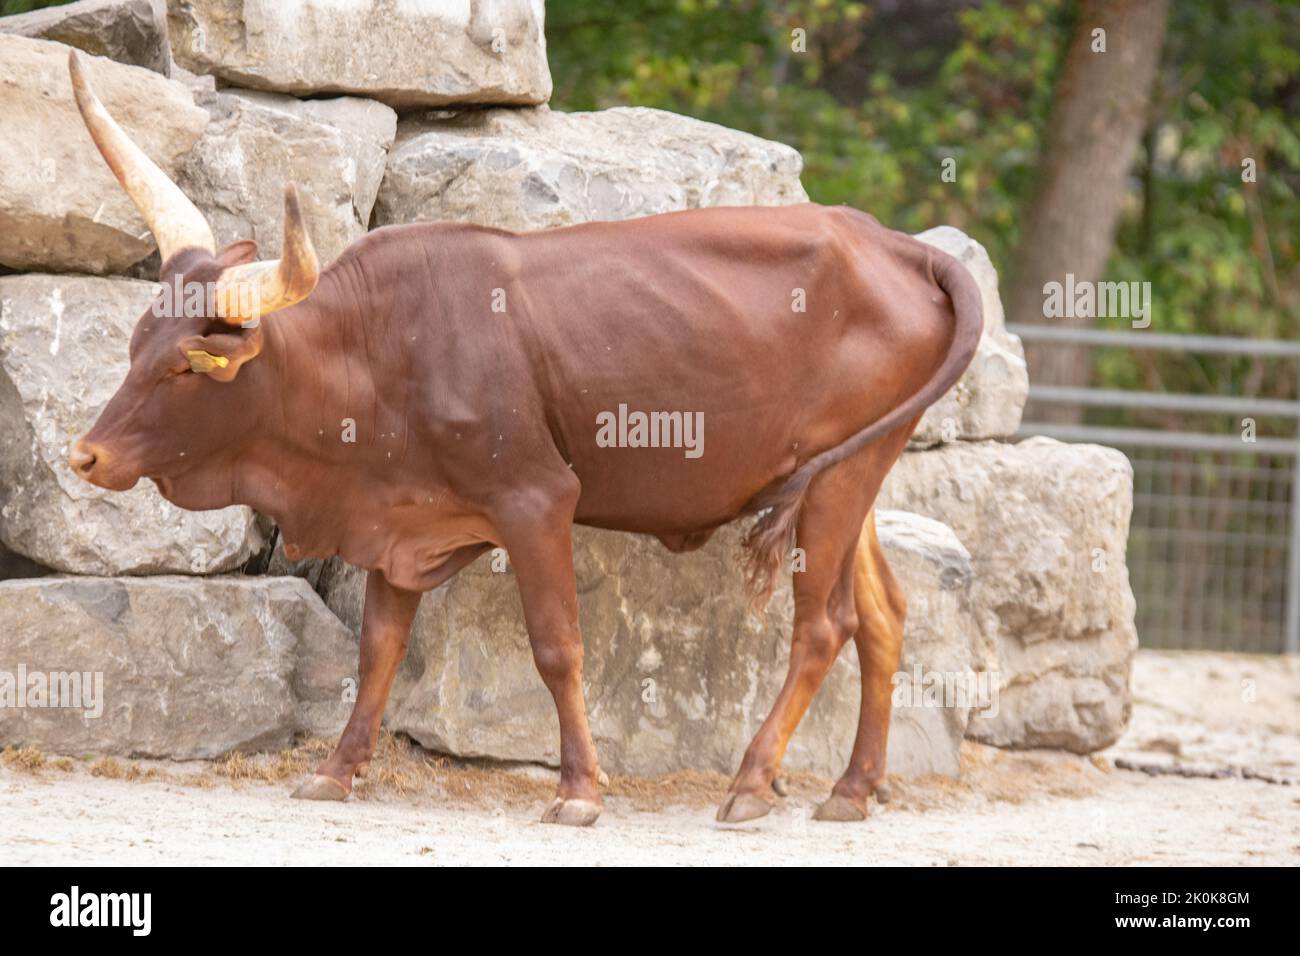 The Watussirind or Ankolerind is a breed of domestic cattle in East Africa. It was created by crossing ancient Egyptian longhorn cattle with humpback Stock Photo